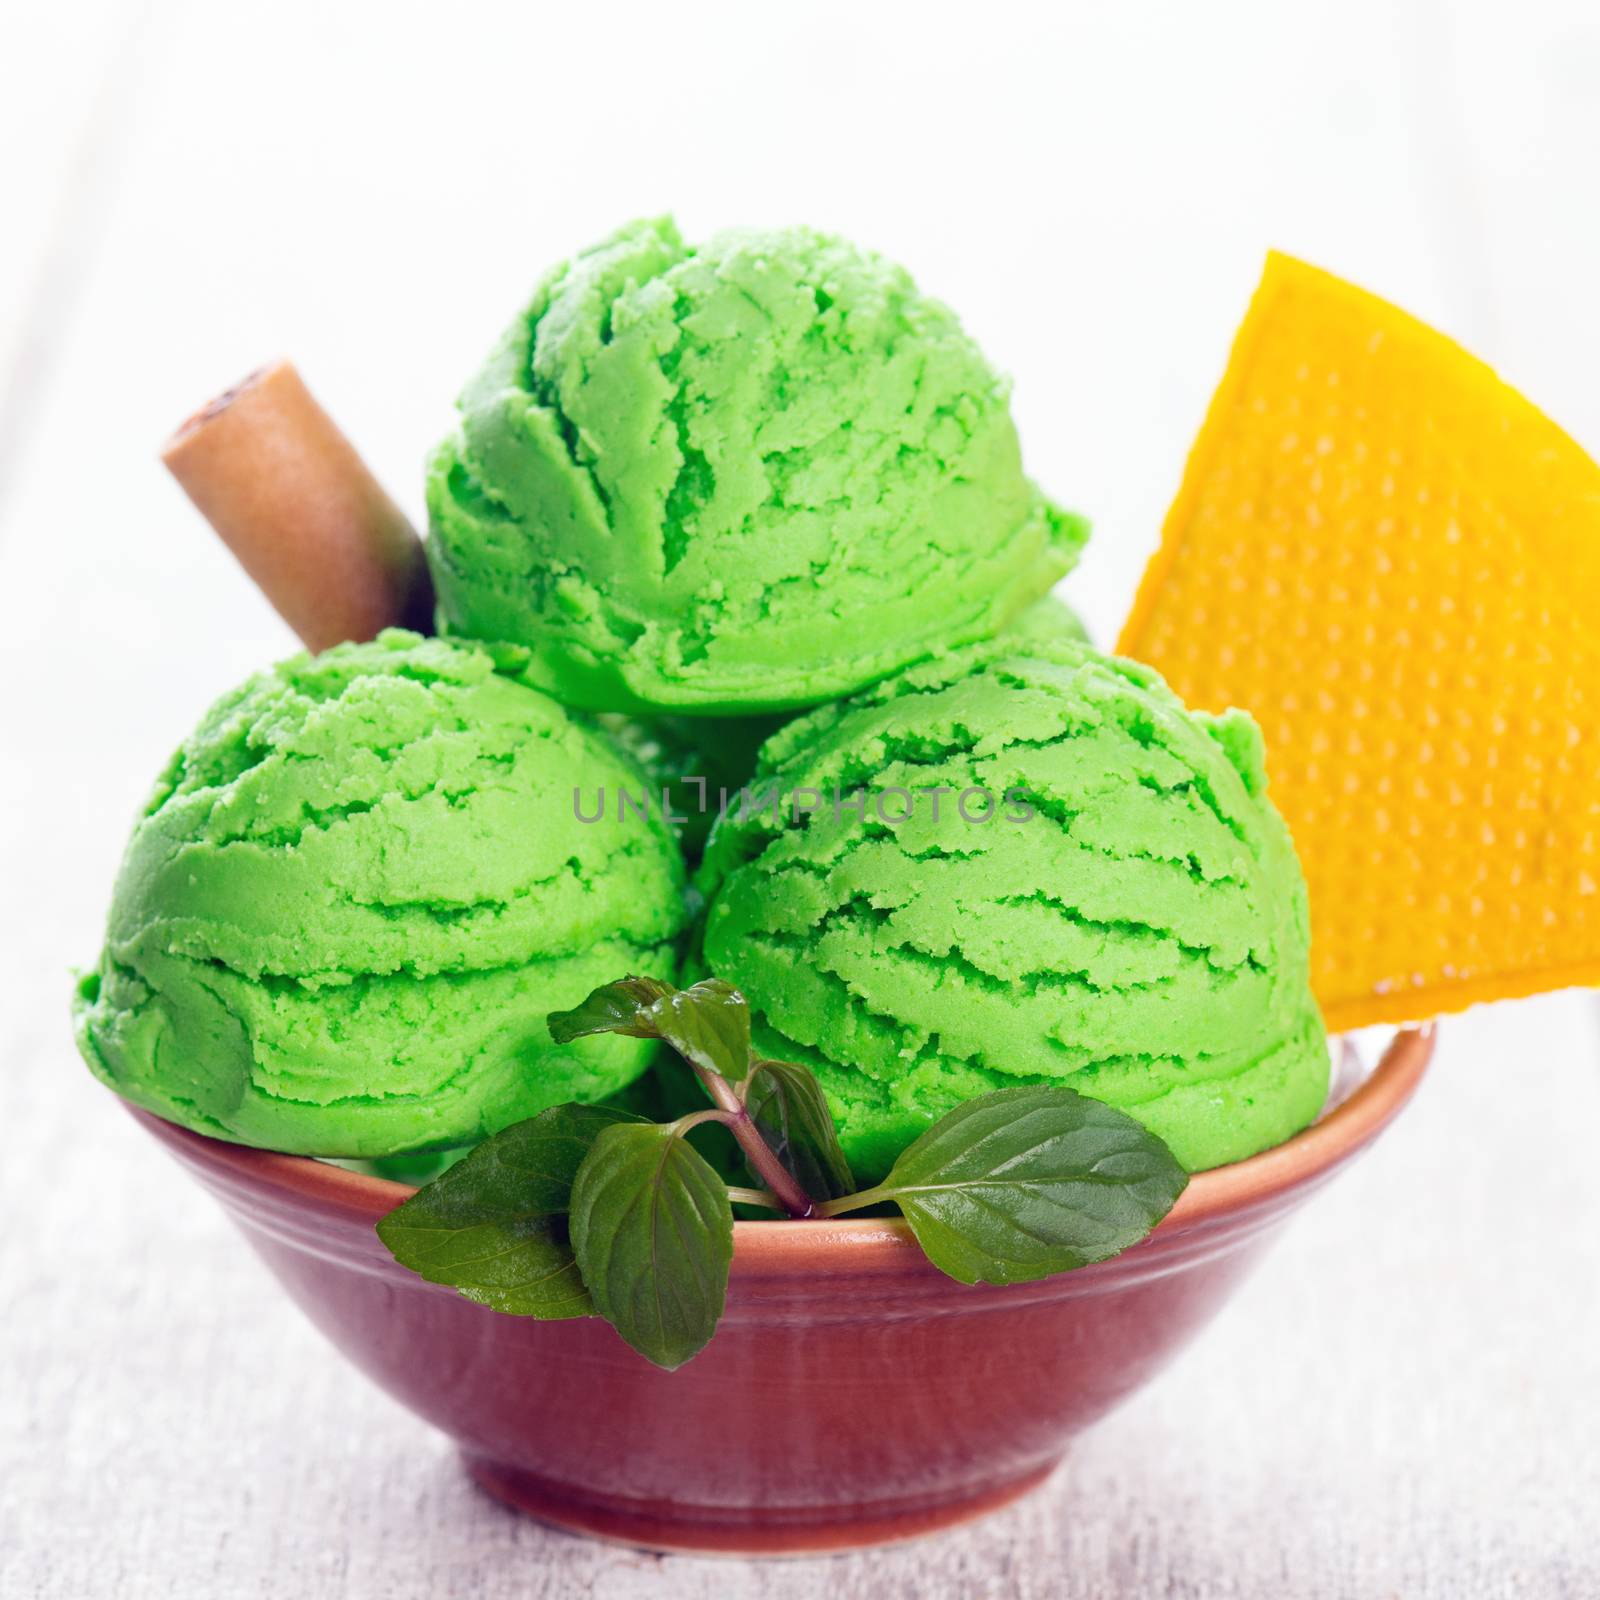 Scoop of green ice cream in bowl on wooden background.